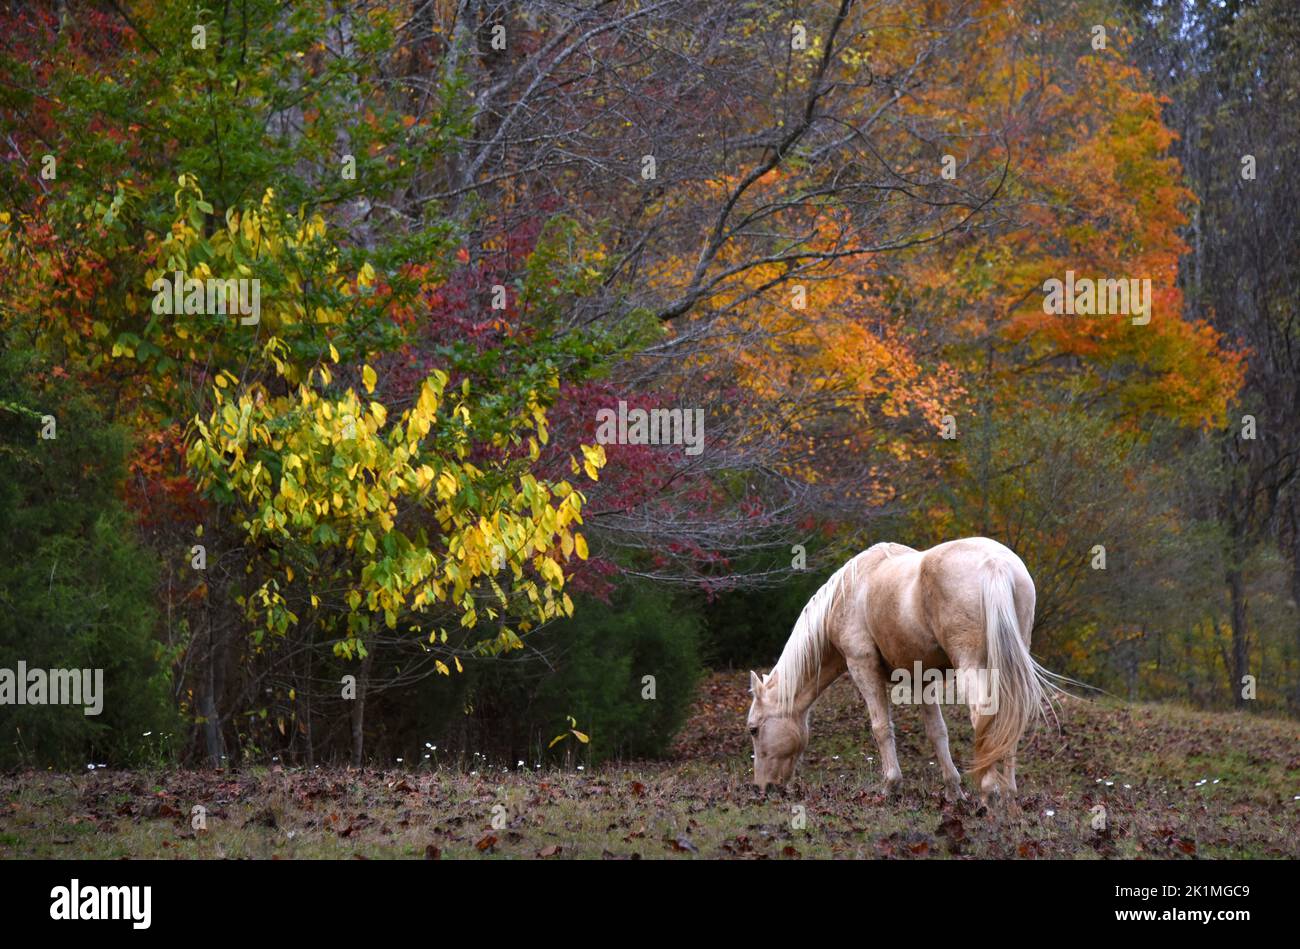 Single, white horse quietly grazes on grass in pasture.  Autumn has colored trees orange and yellow. Stock Photo